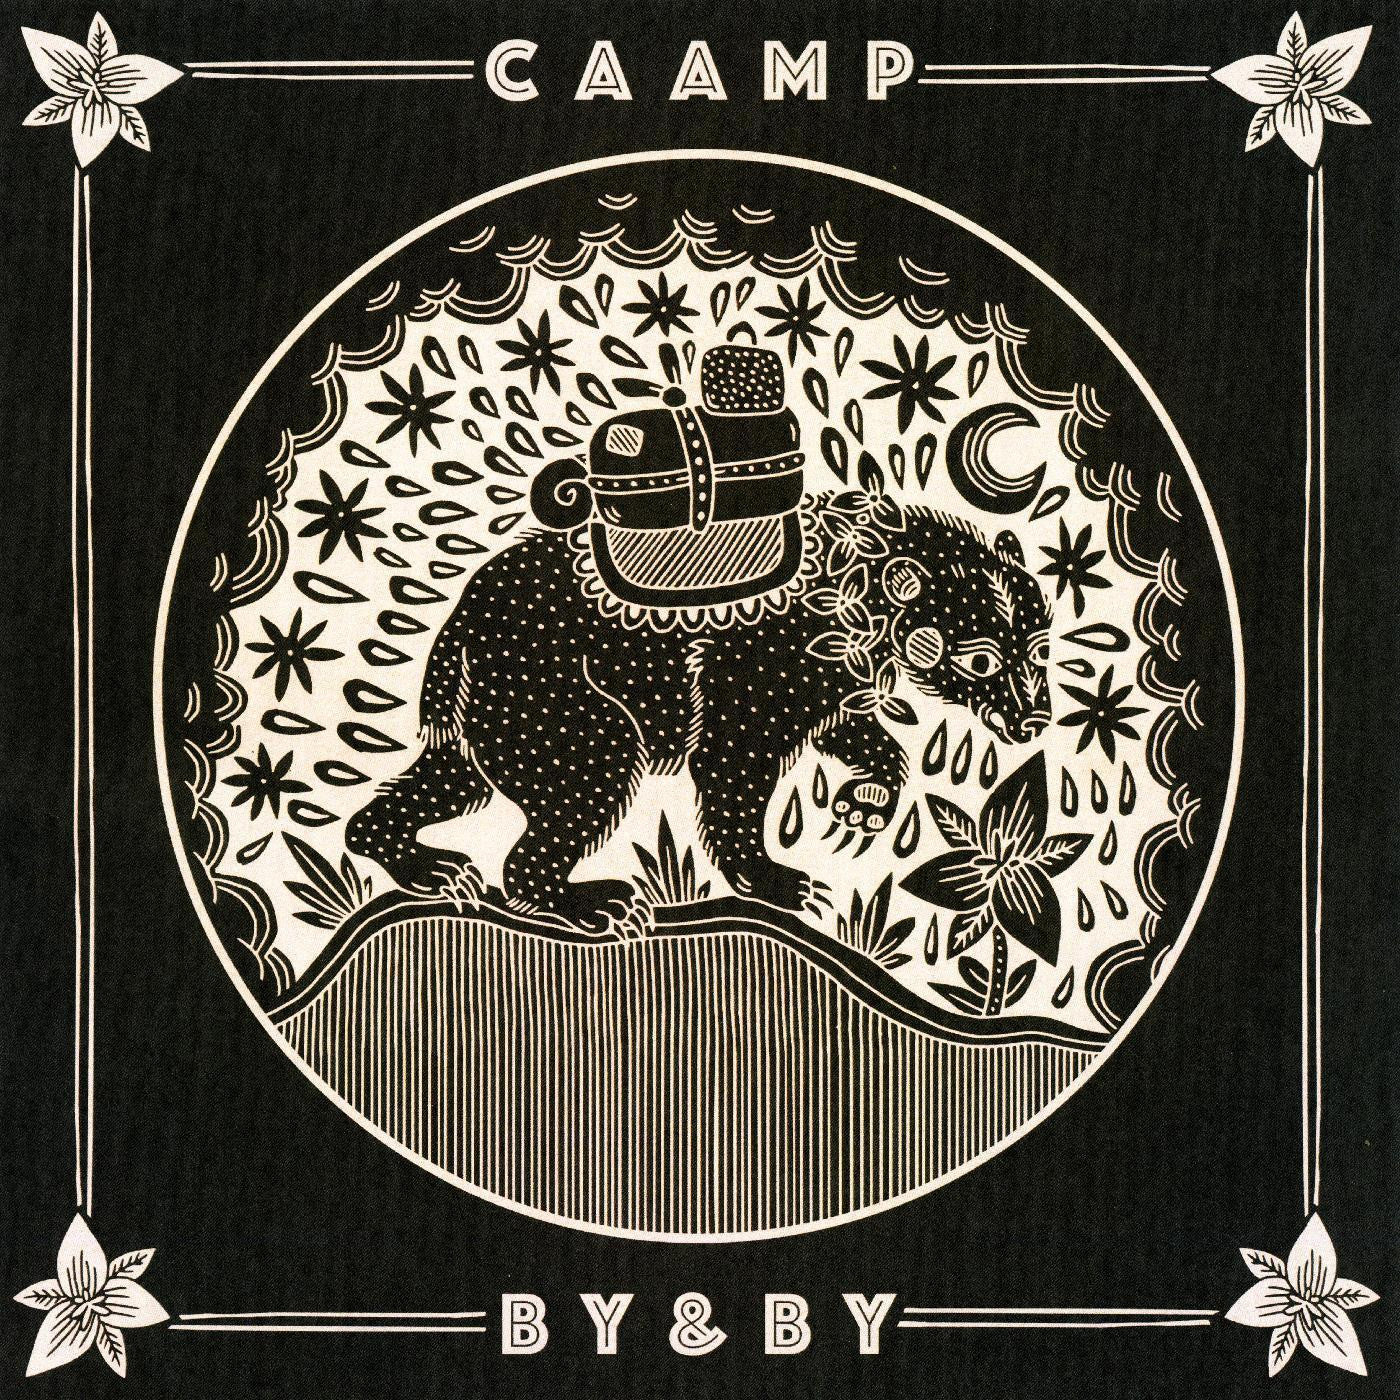 Order Caamp - By & By (Black + White Vinyl)